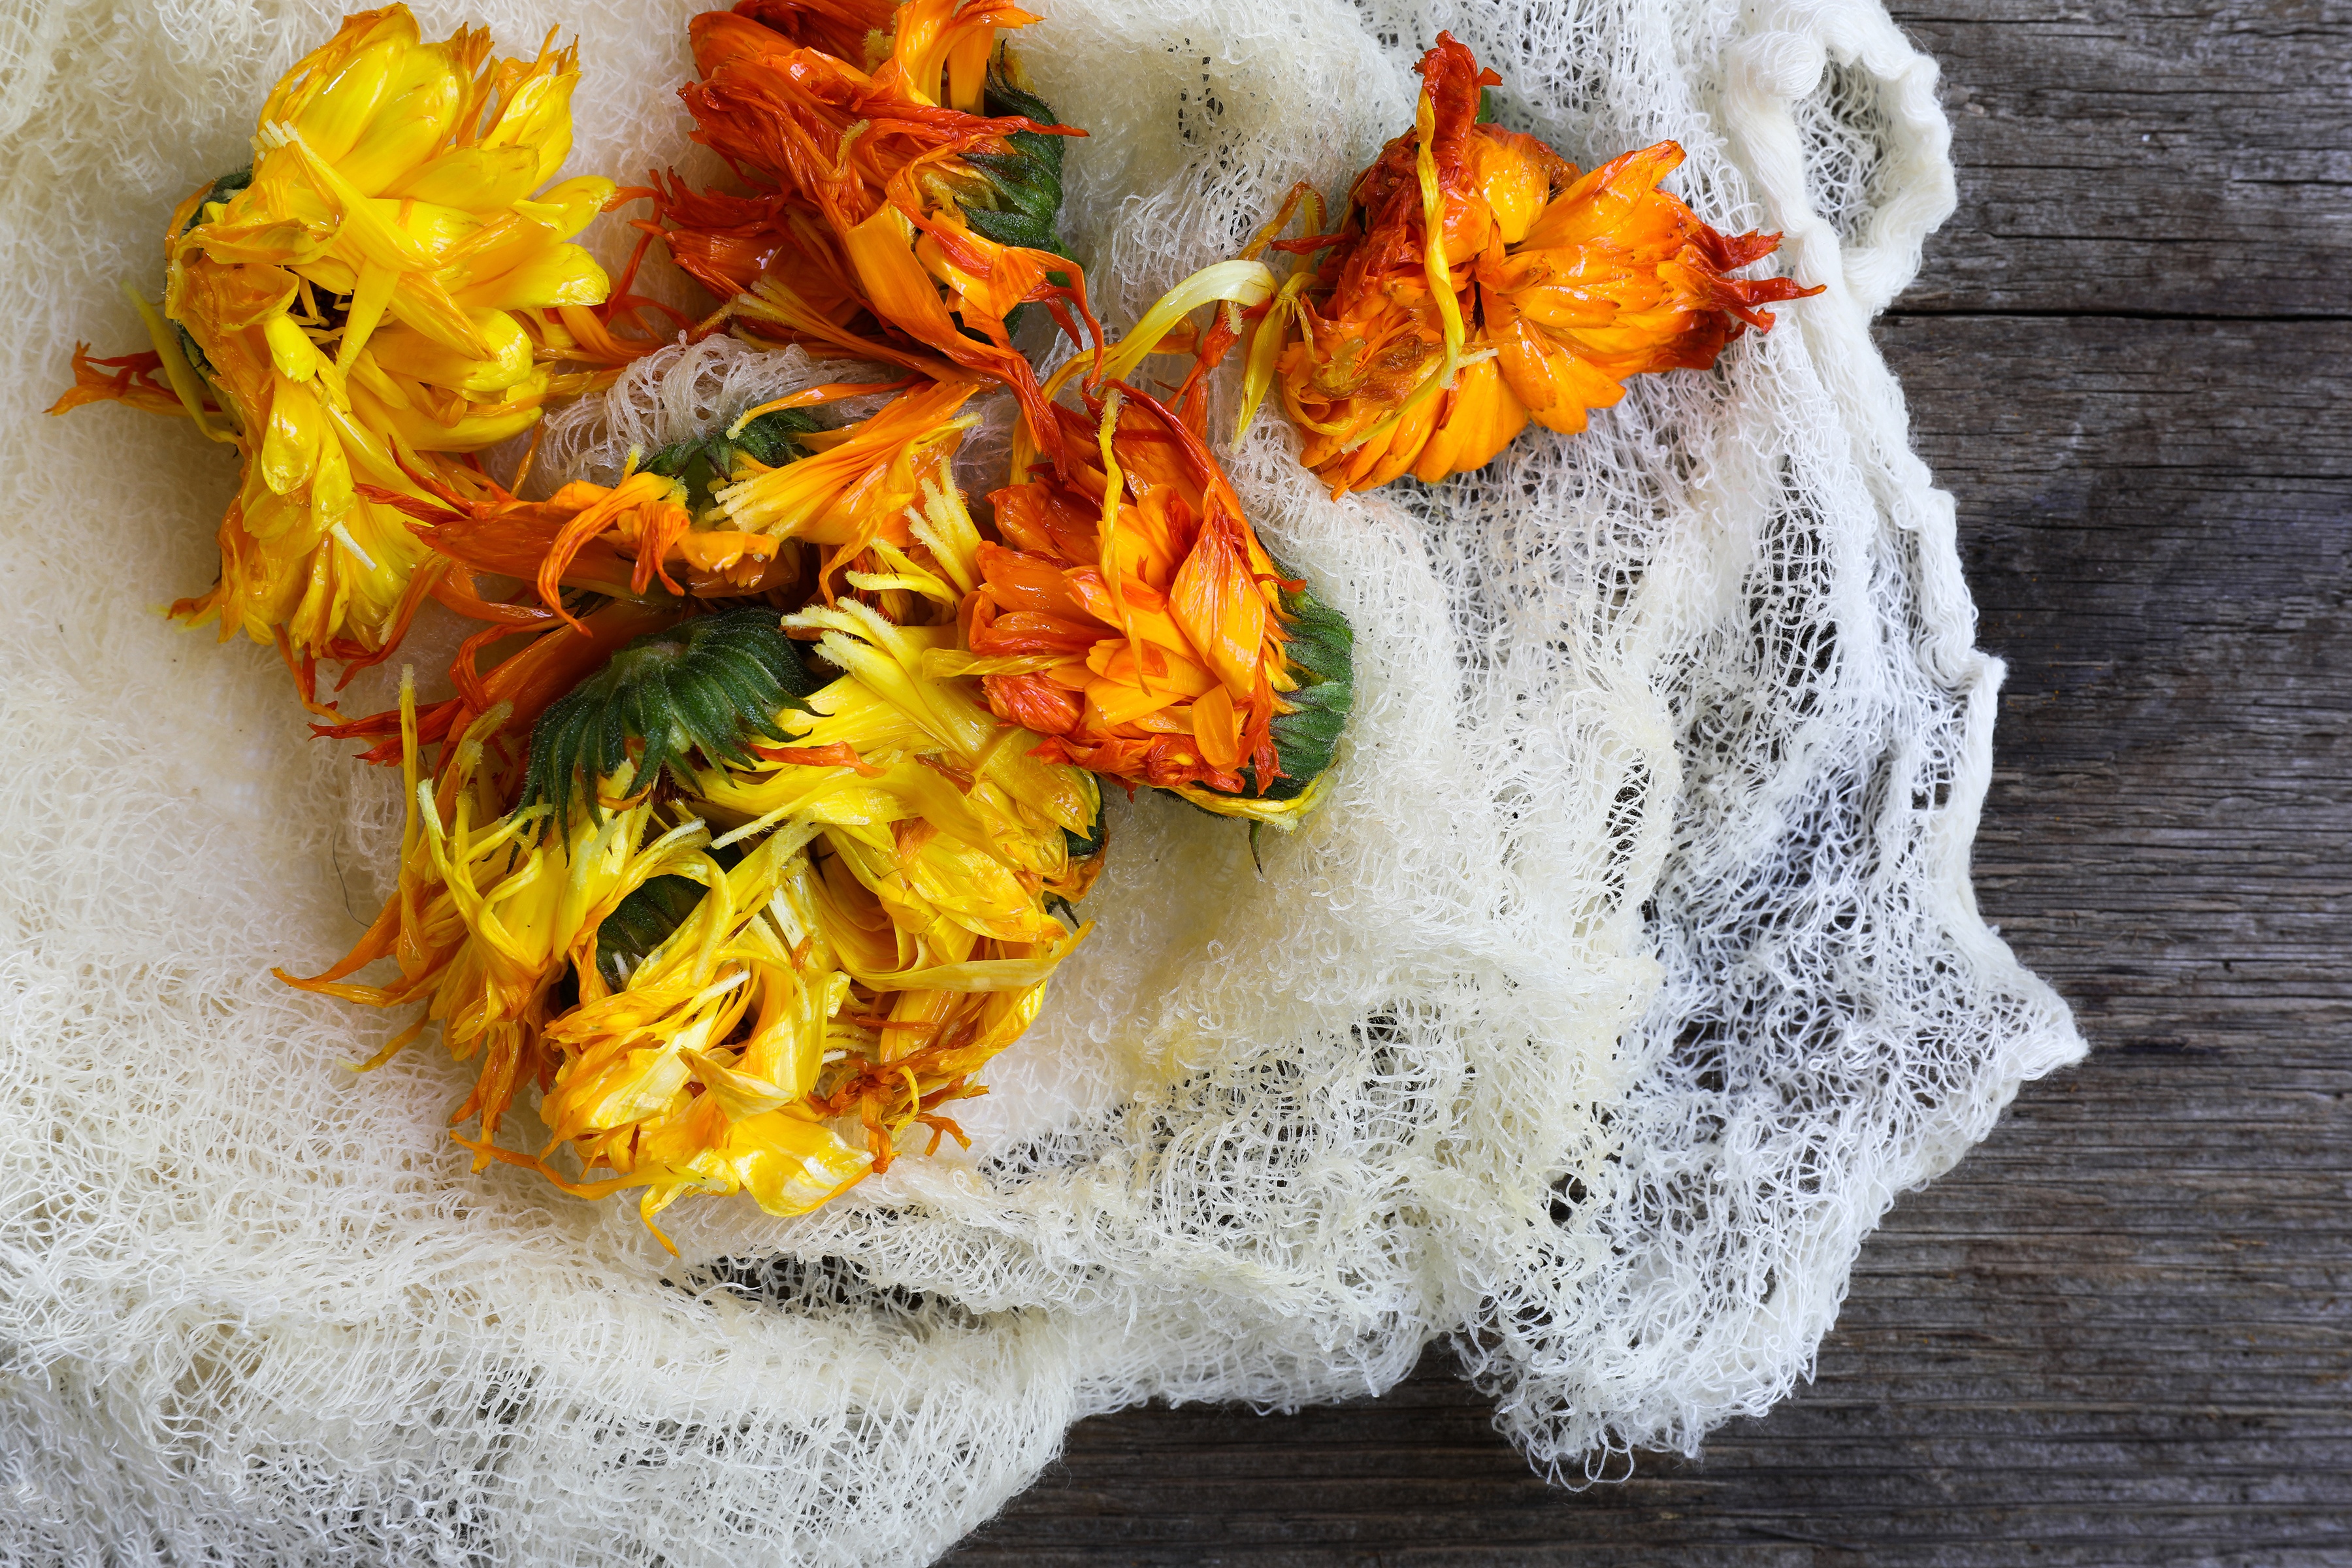 Calendula flowers laying on cheese cloth on worn wooden table